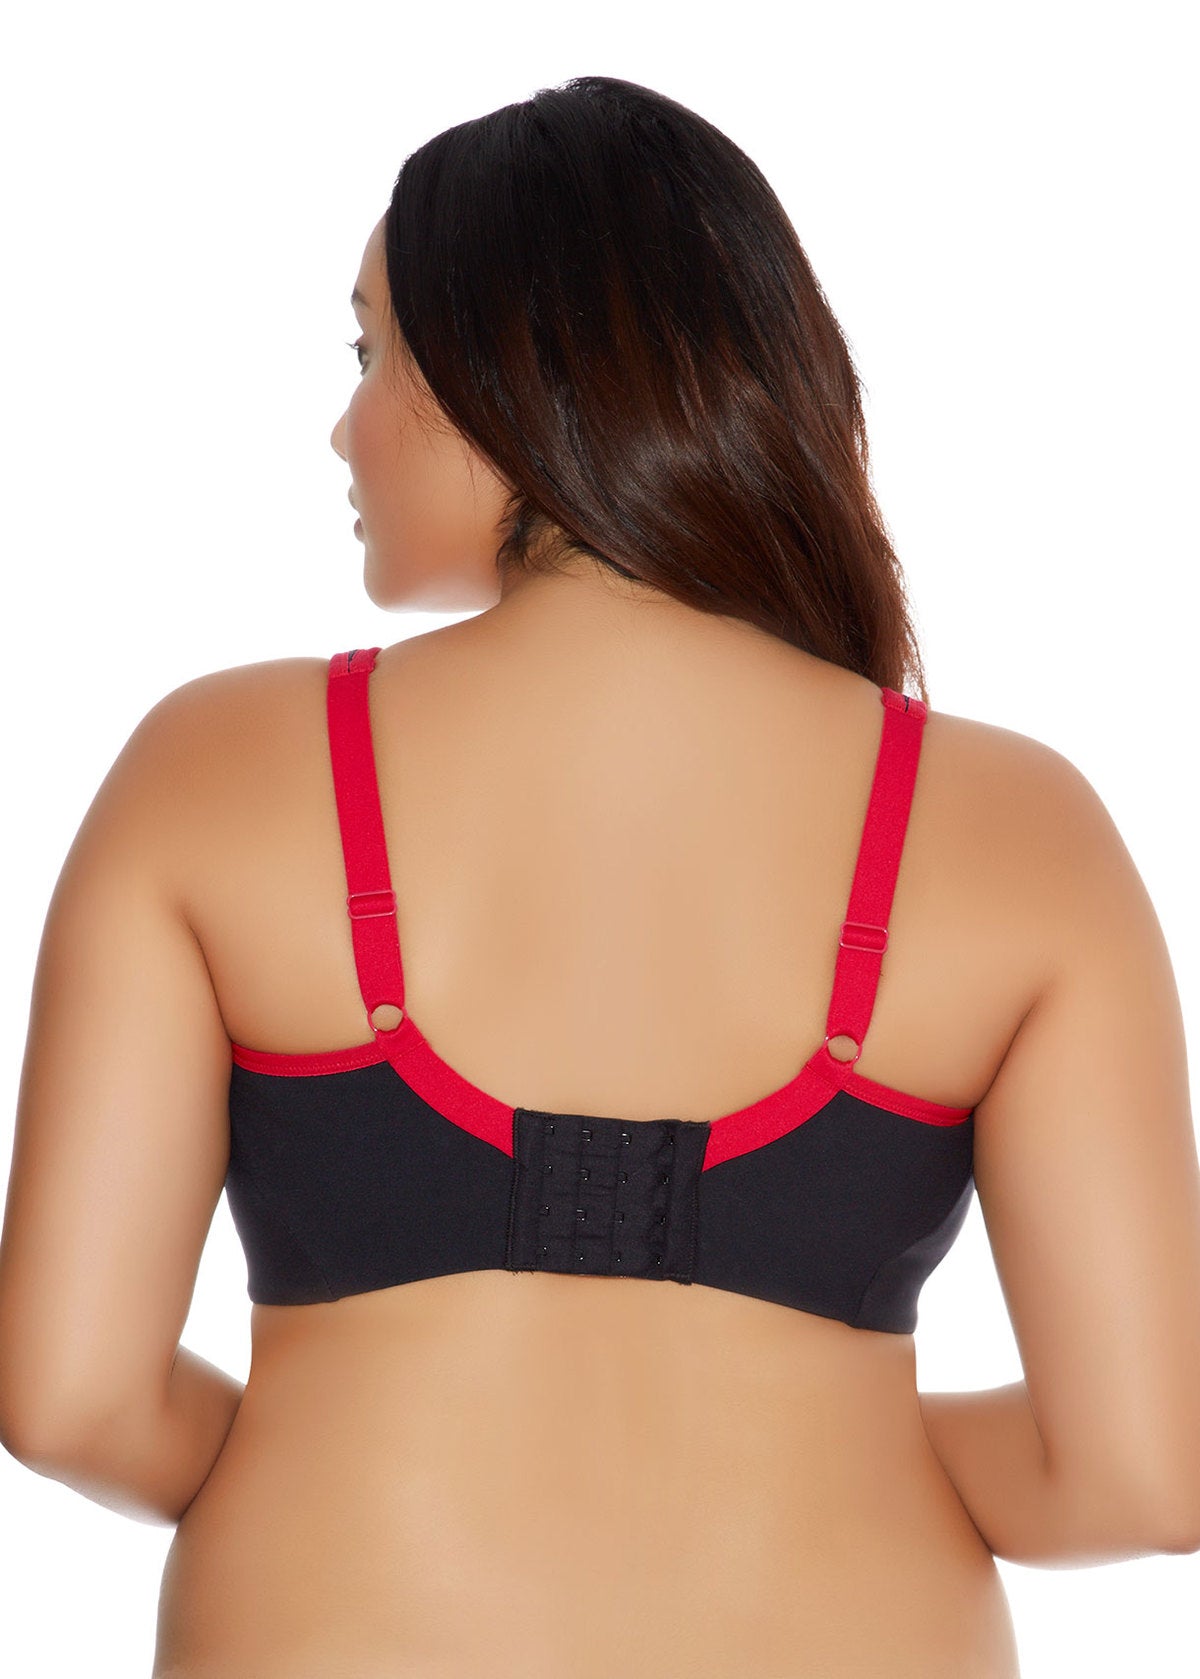 Non Wired Sports Bra - Black worn by model back view